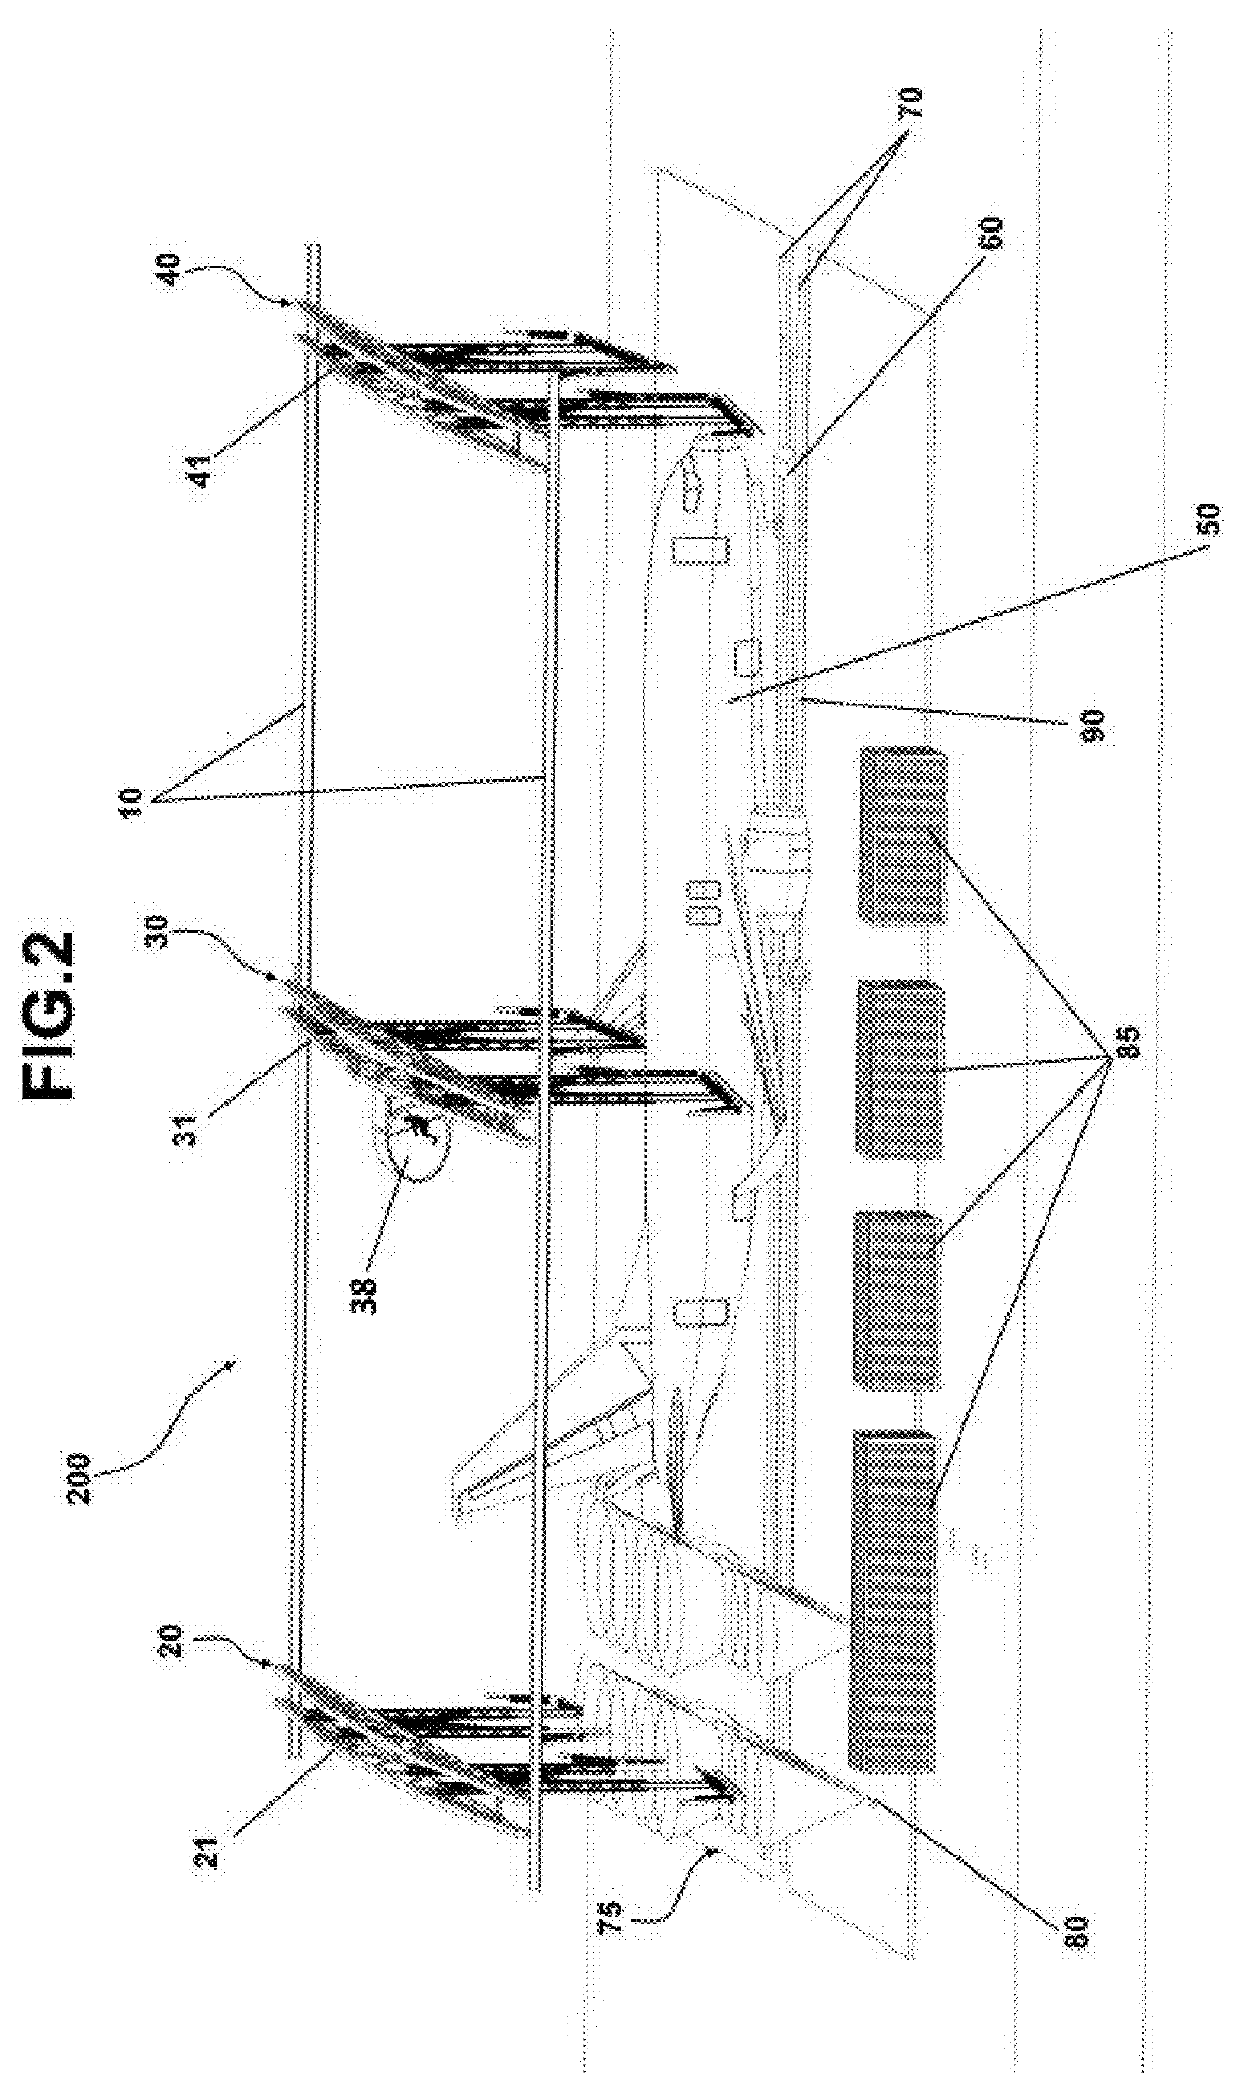 System and Method for Washing and De-icing Aircrafts